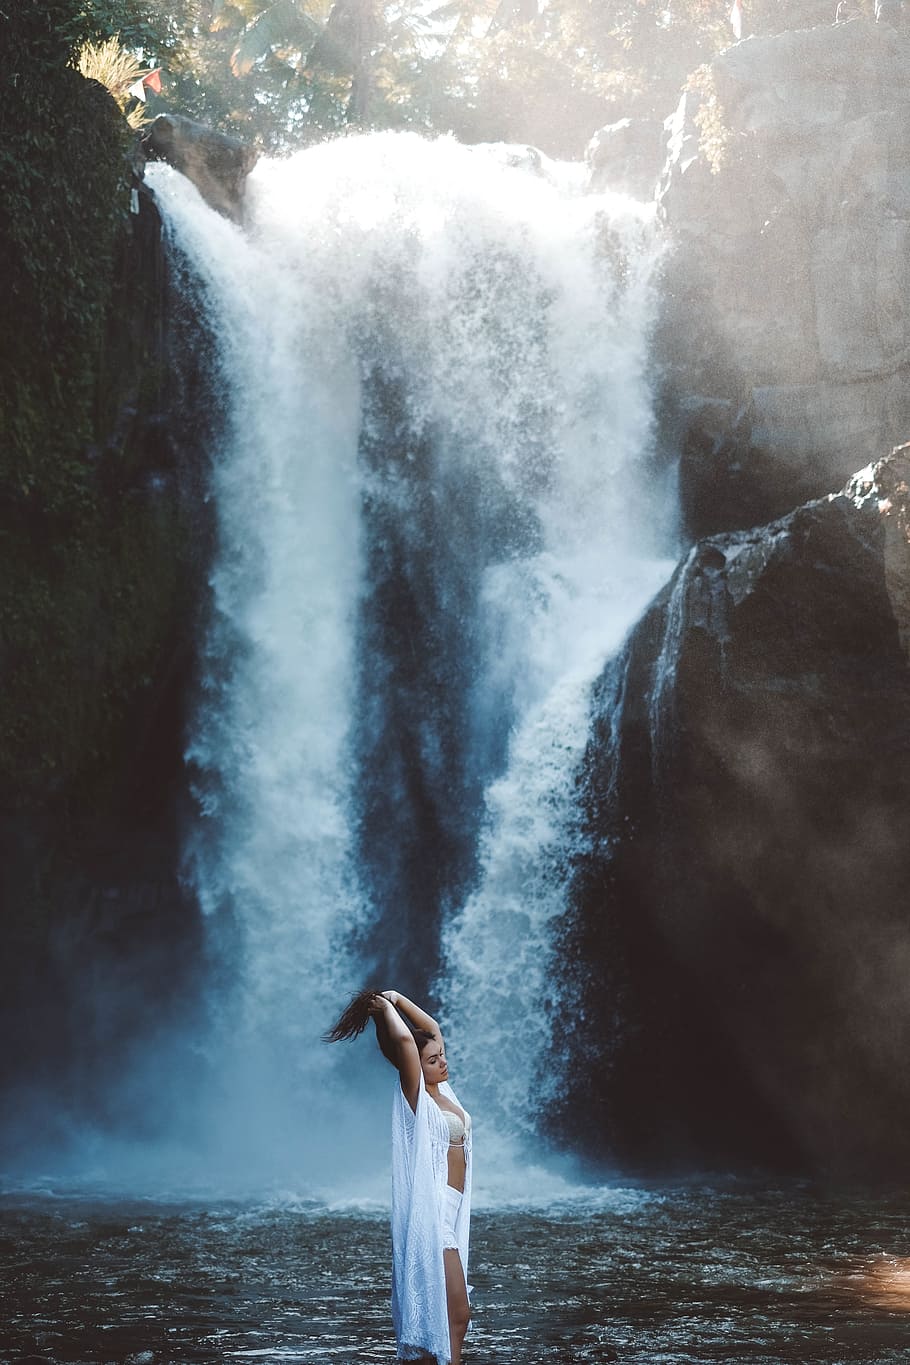 waterfalls, rocks, hill, nature, people, girl, beauty, swimming, water, one person